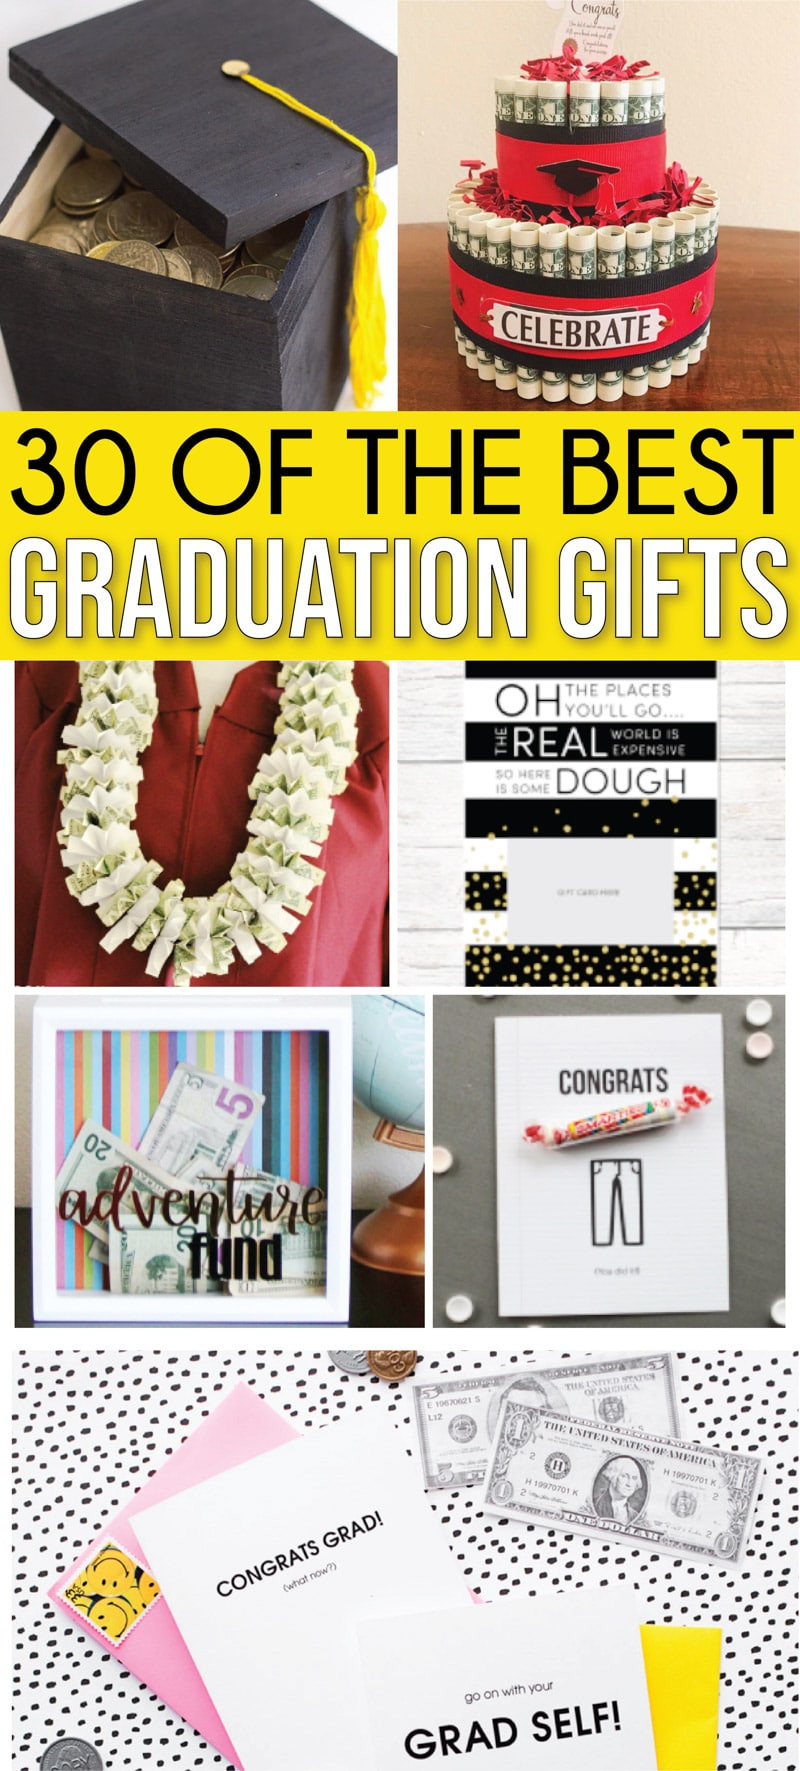 Friends Graduation Gift Ideas
 30 Awesome High School Graduation Gifts Graduates Actually